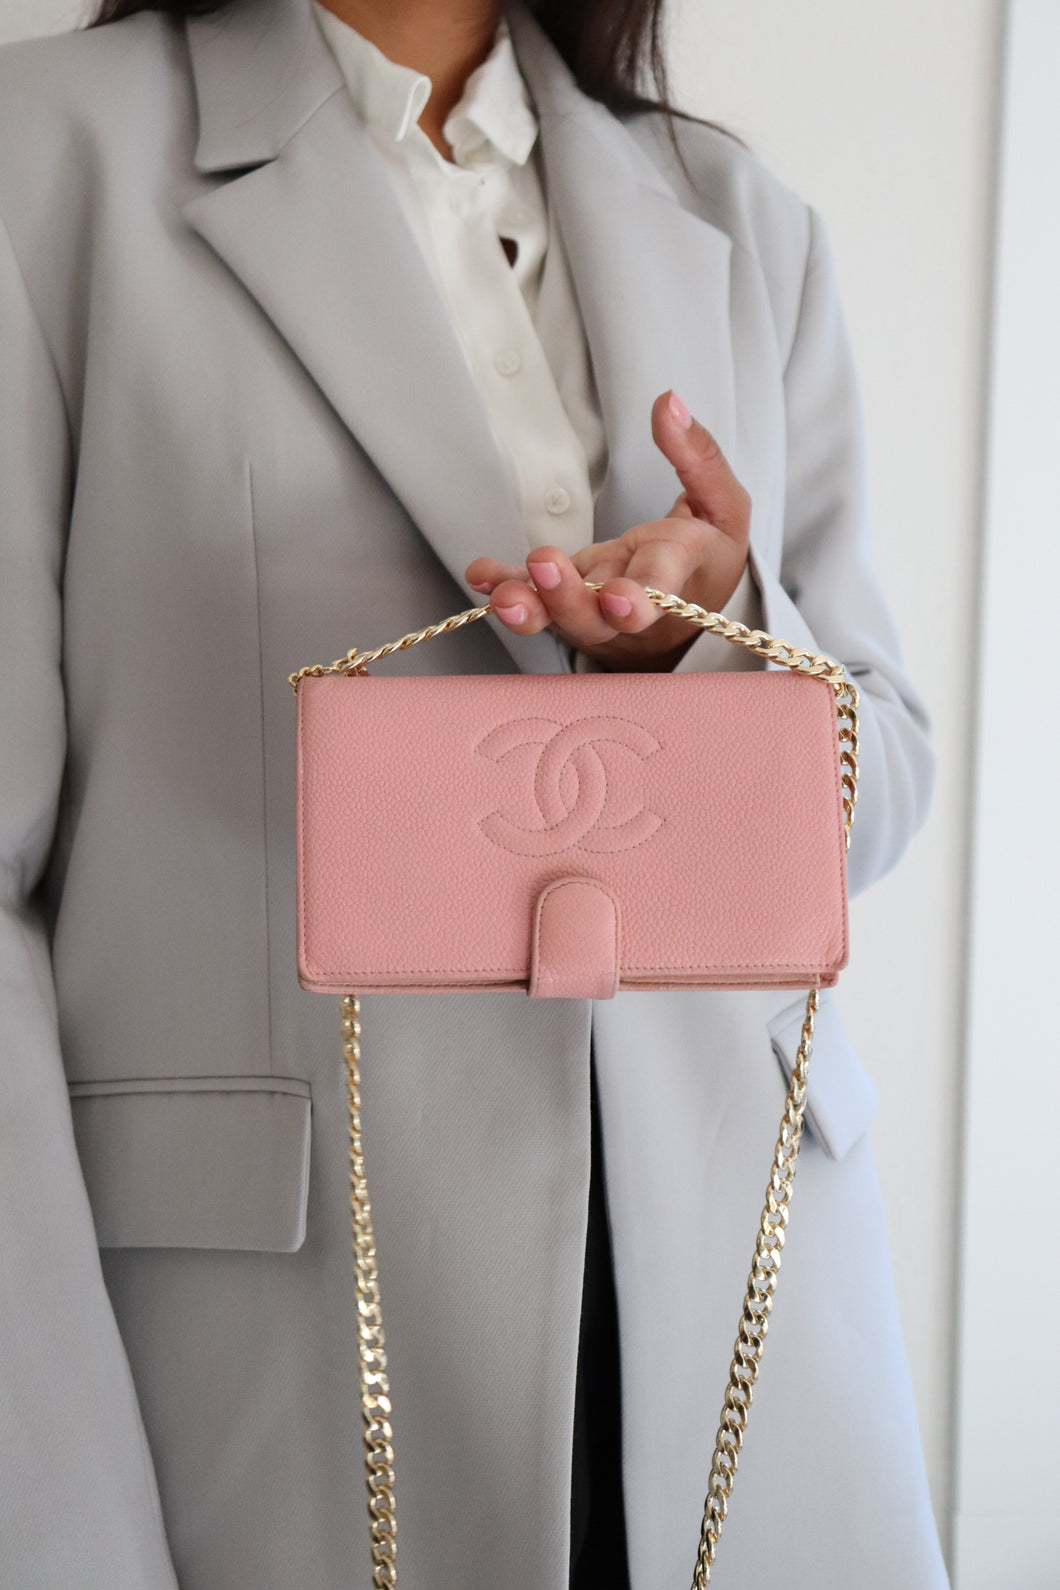 Chanel caviar wallet in pink